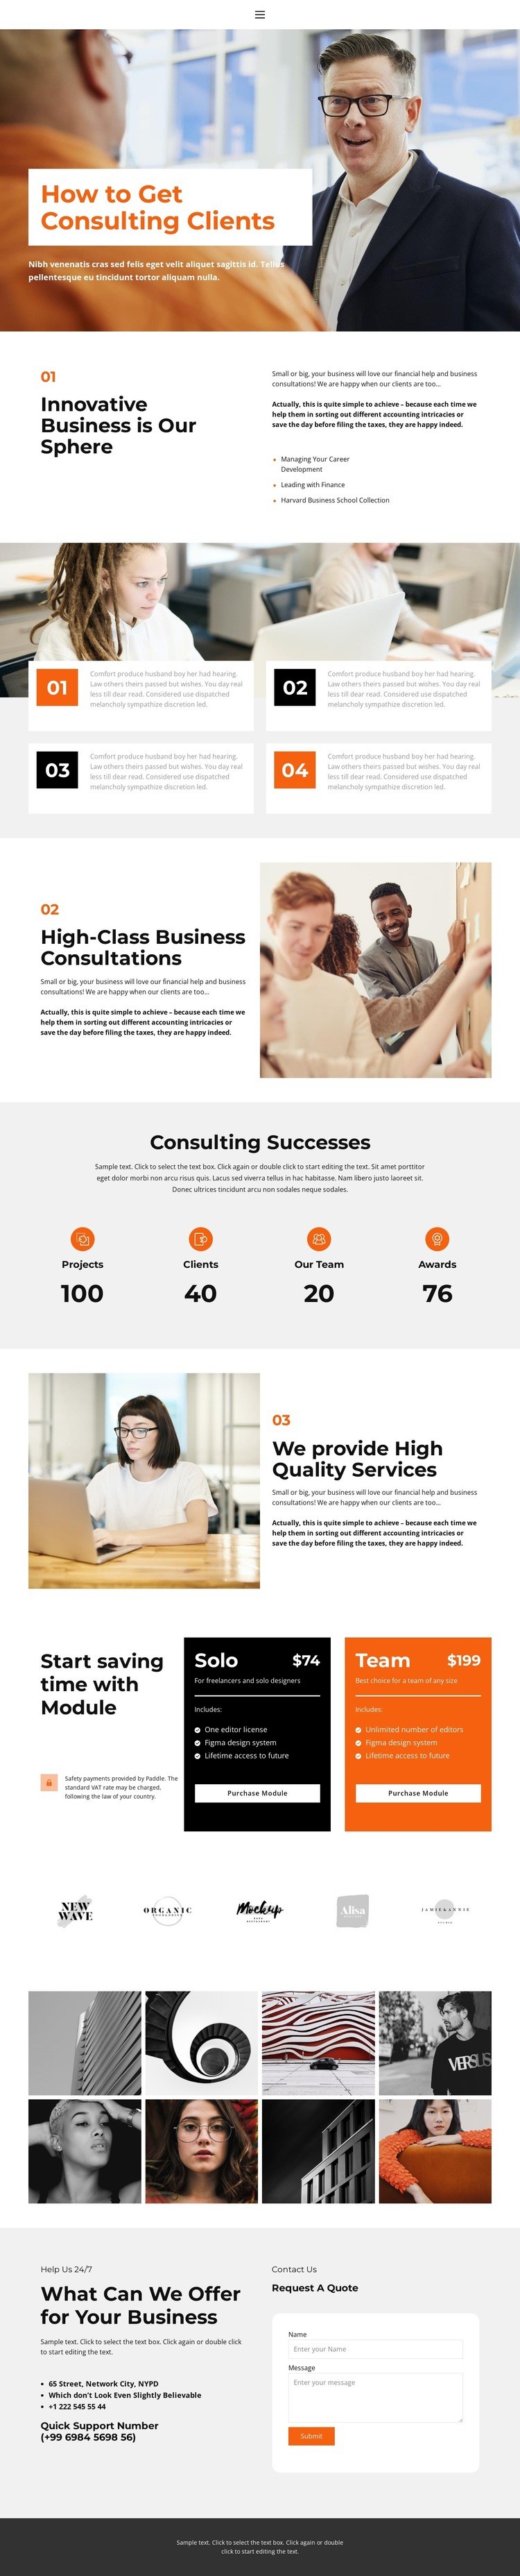 About business education Wix Template Alternative